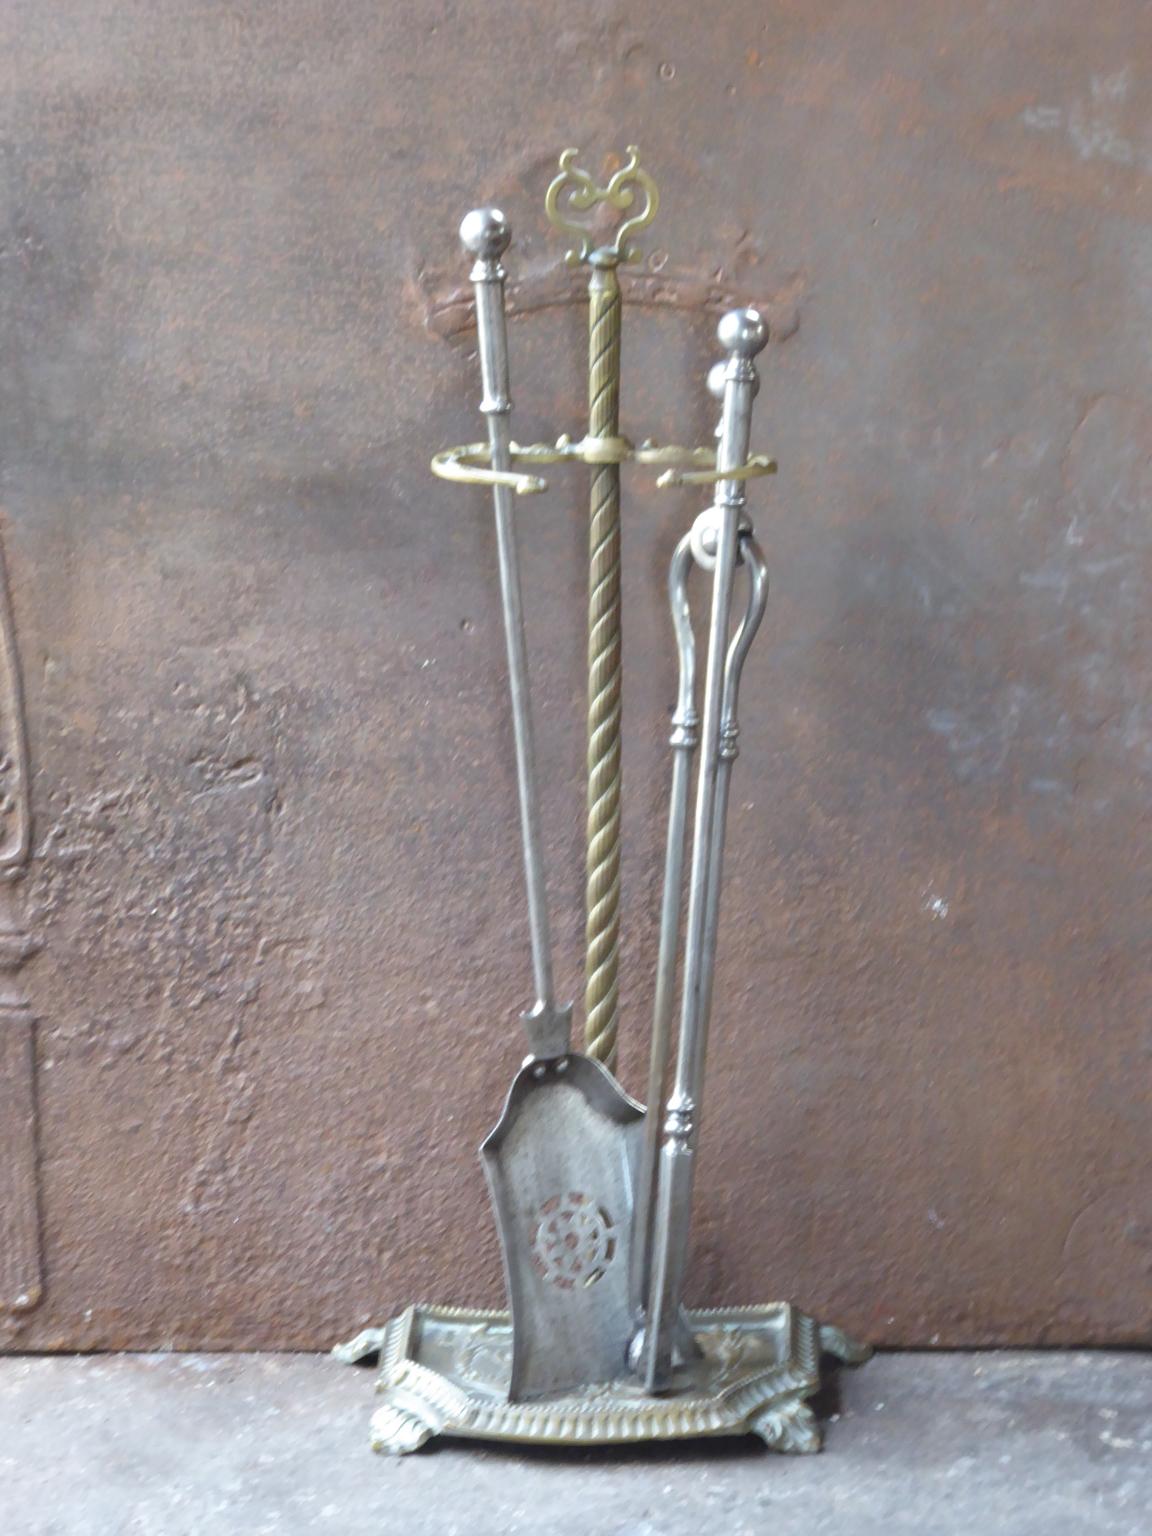 19th century English Victorian fireplace toolset made of polished steel and brass. The toolset consists of three fire irons and a stand. The condition is good.













